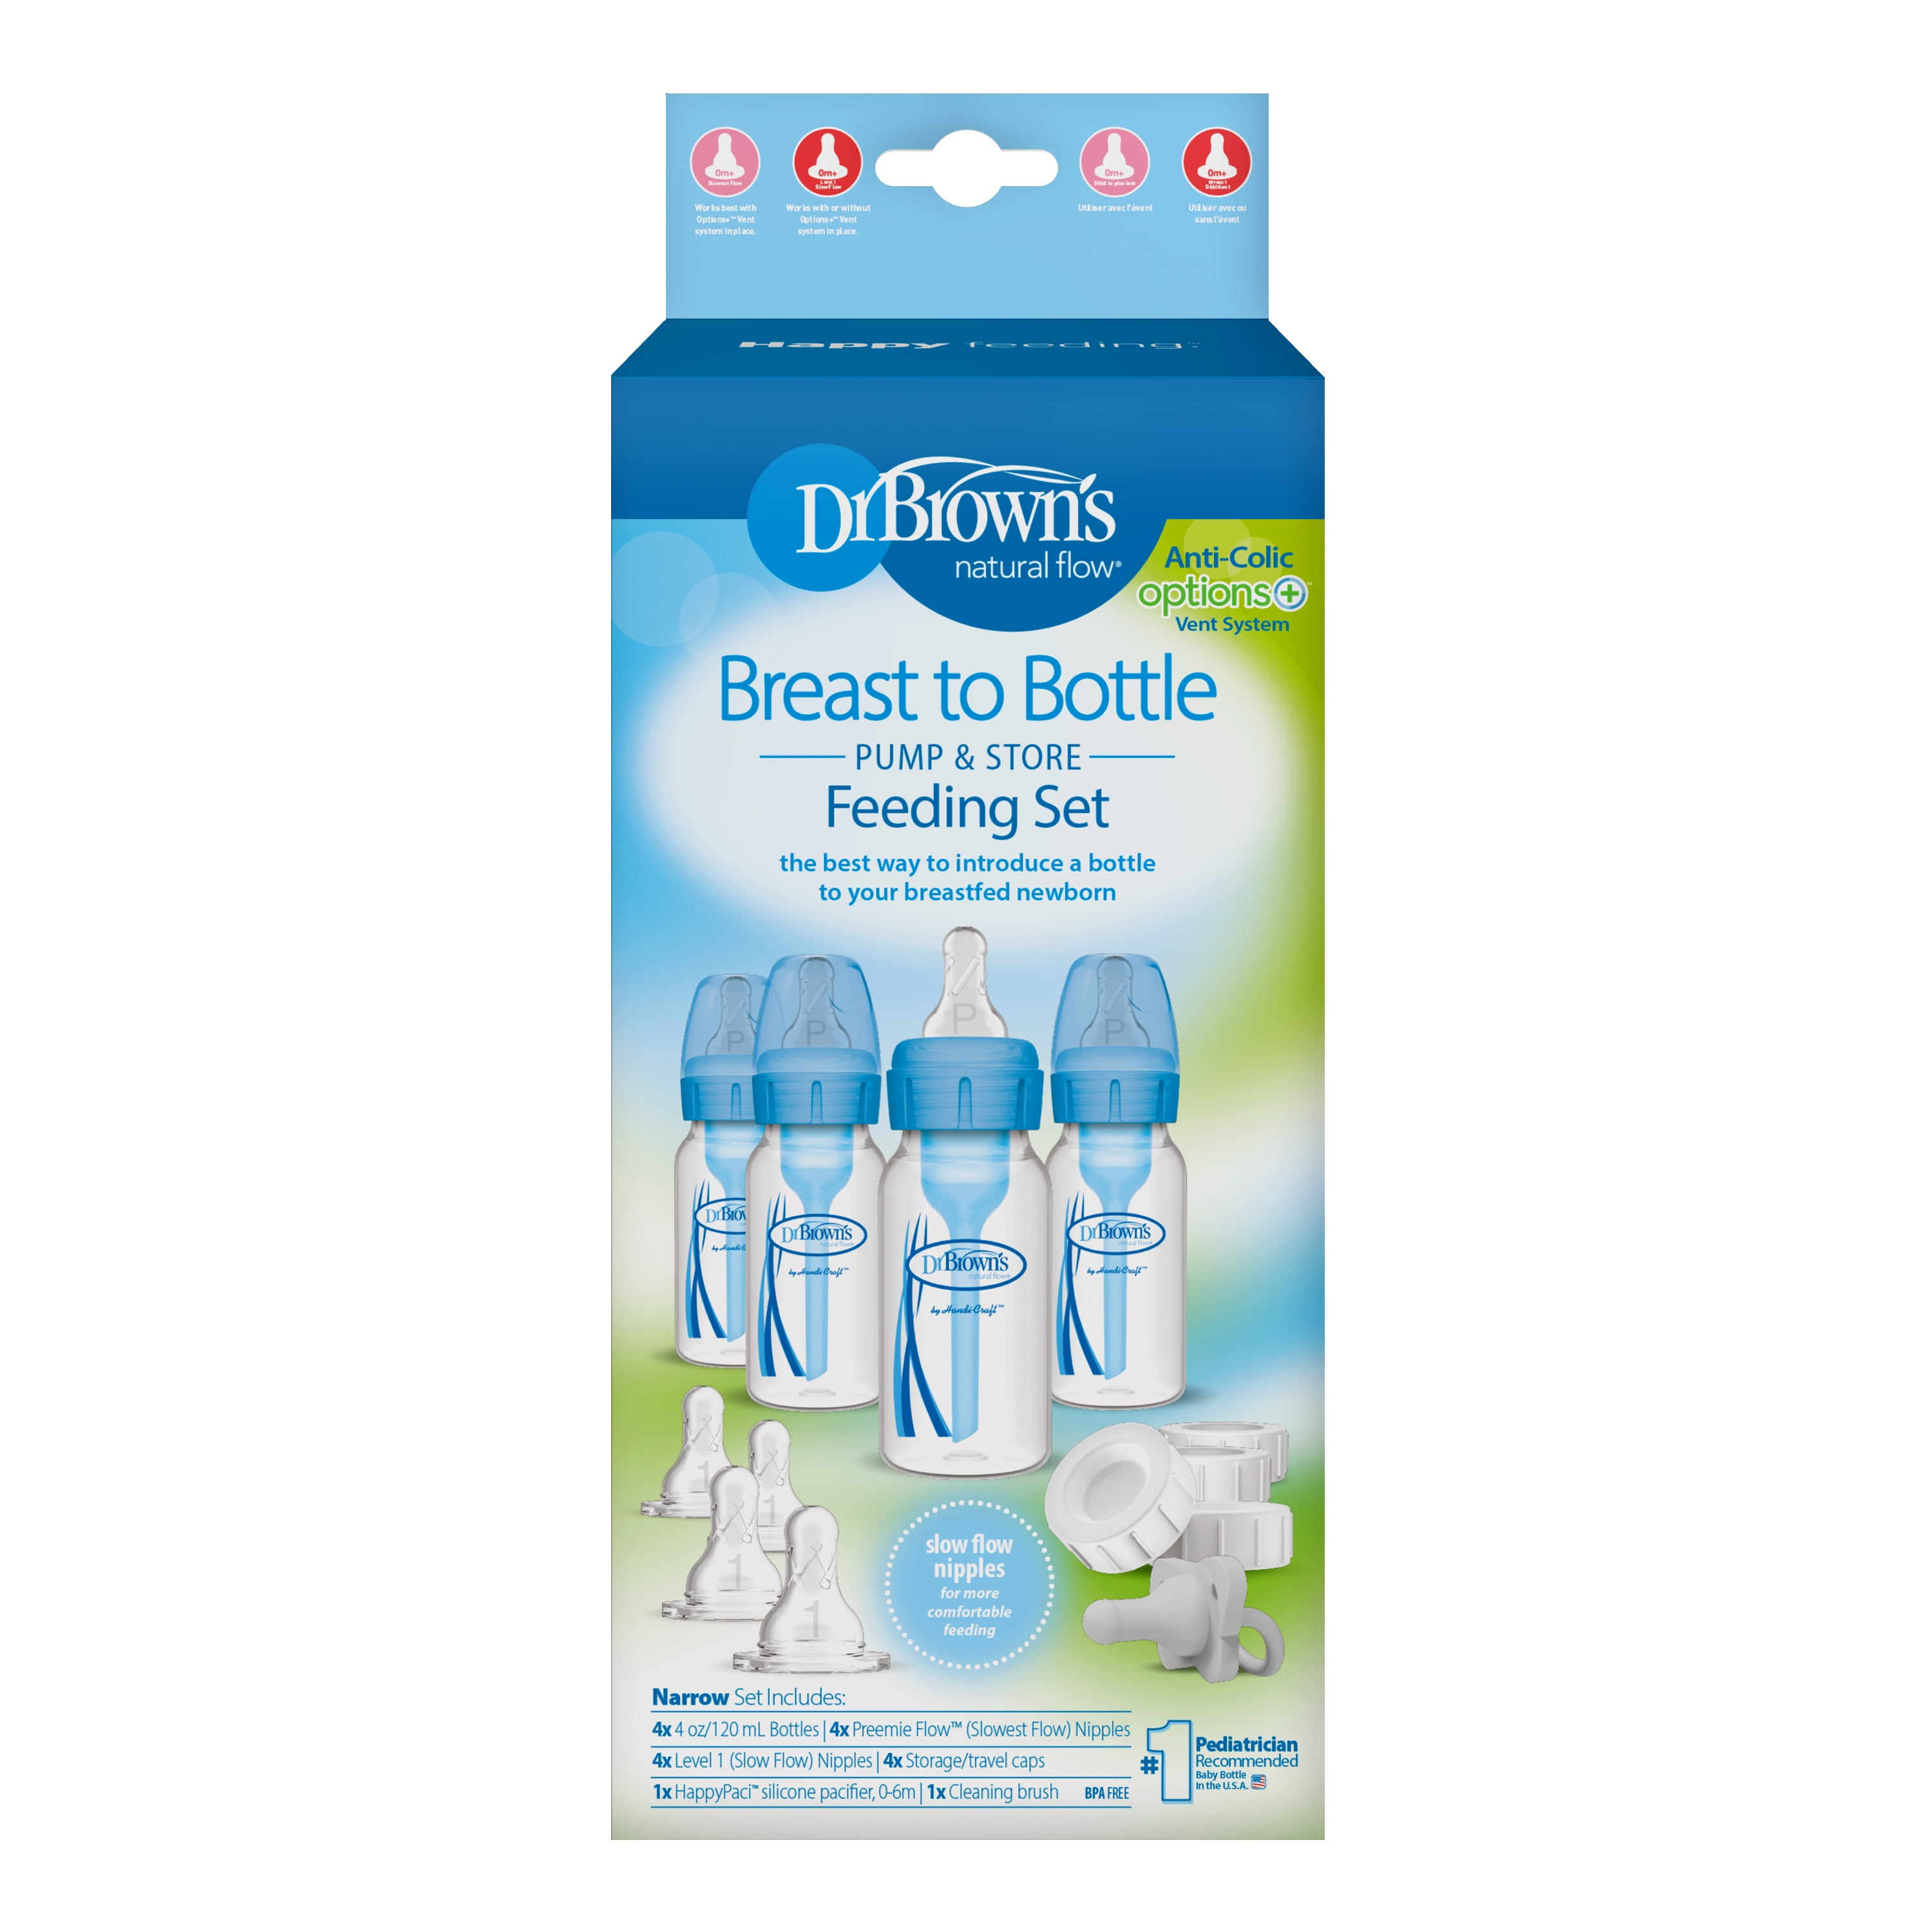 Dr. Brown's Natural Flow® Options+™ Wide-Neck Glass Bottle Silicone Sleeves